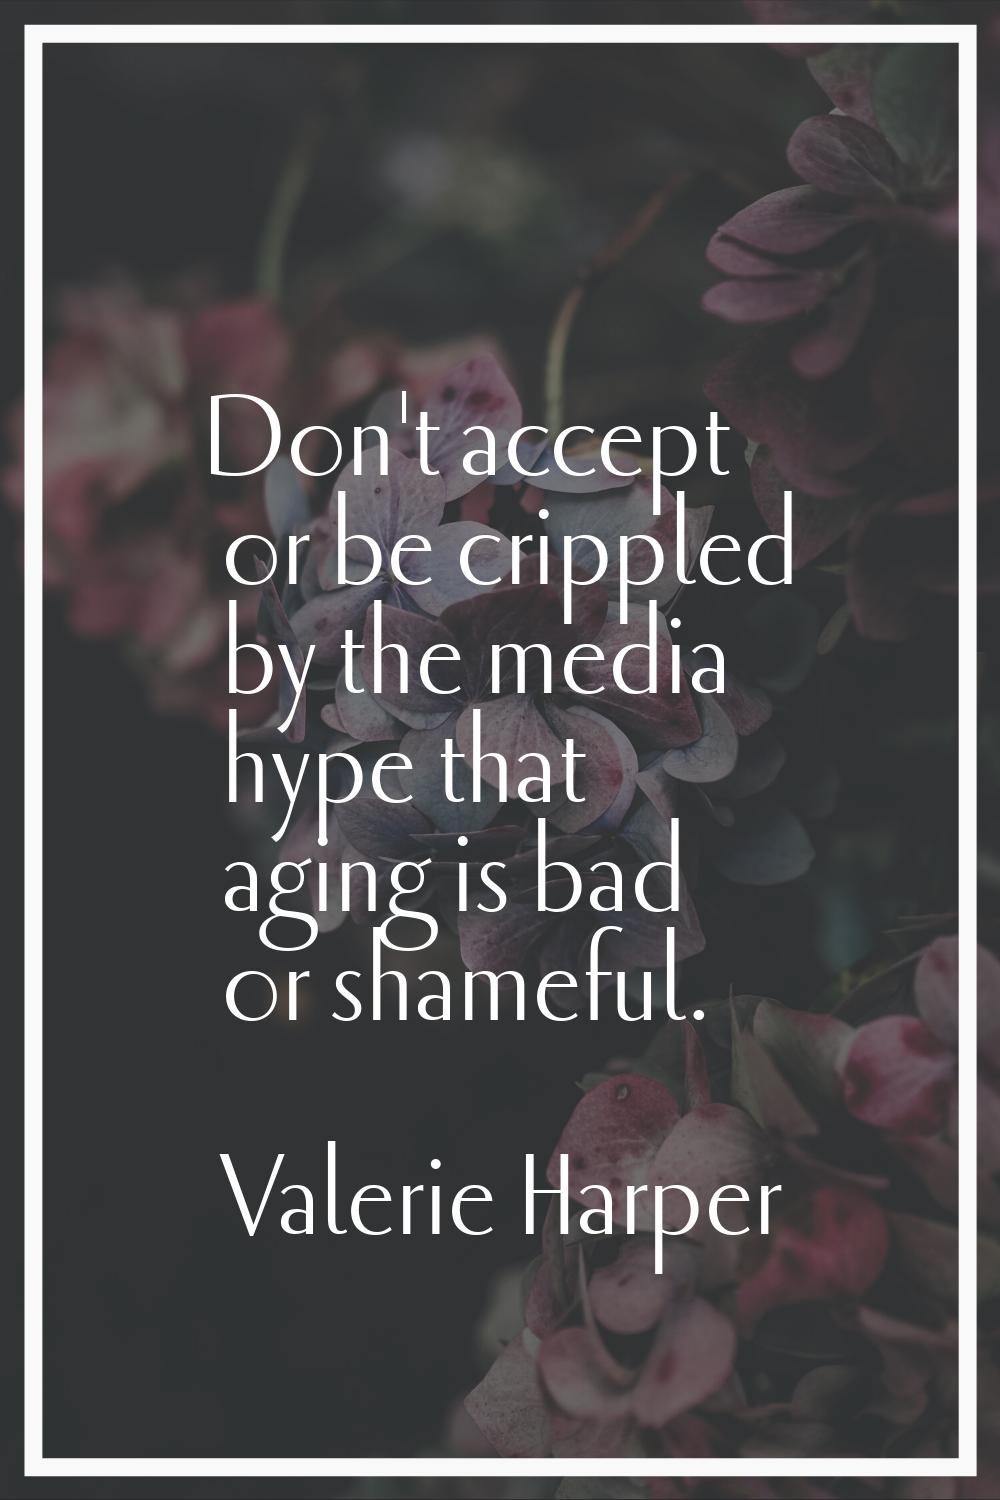 Don't accept or be crippled by the media hype that aging is bad or shameful.